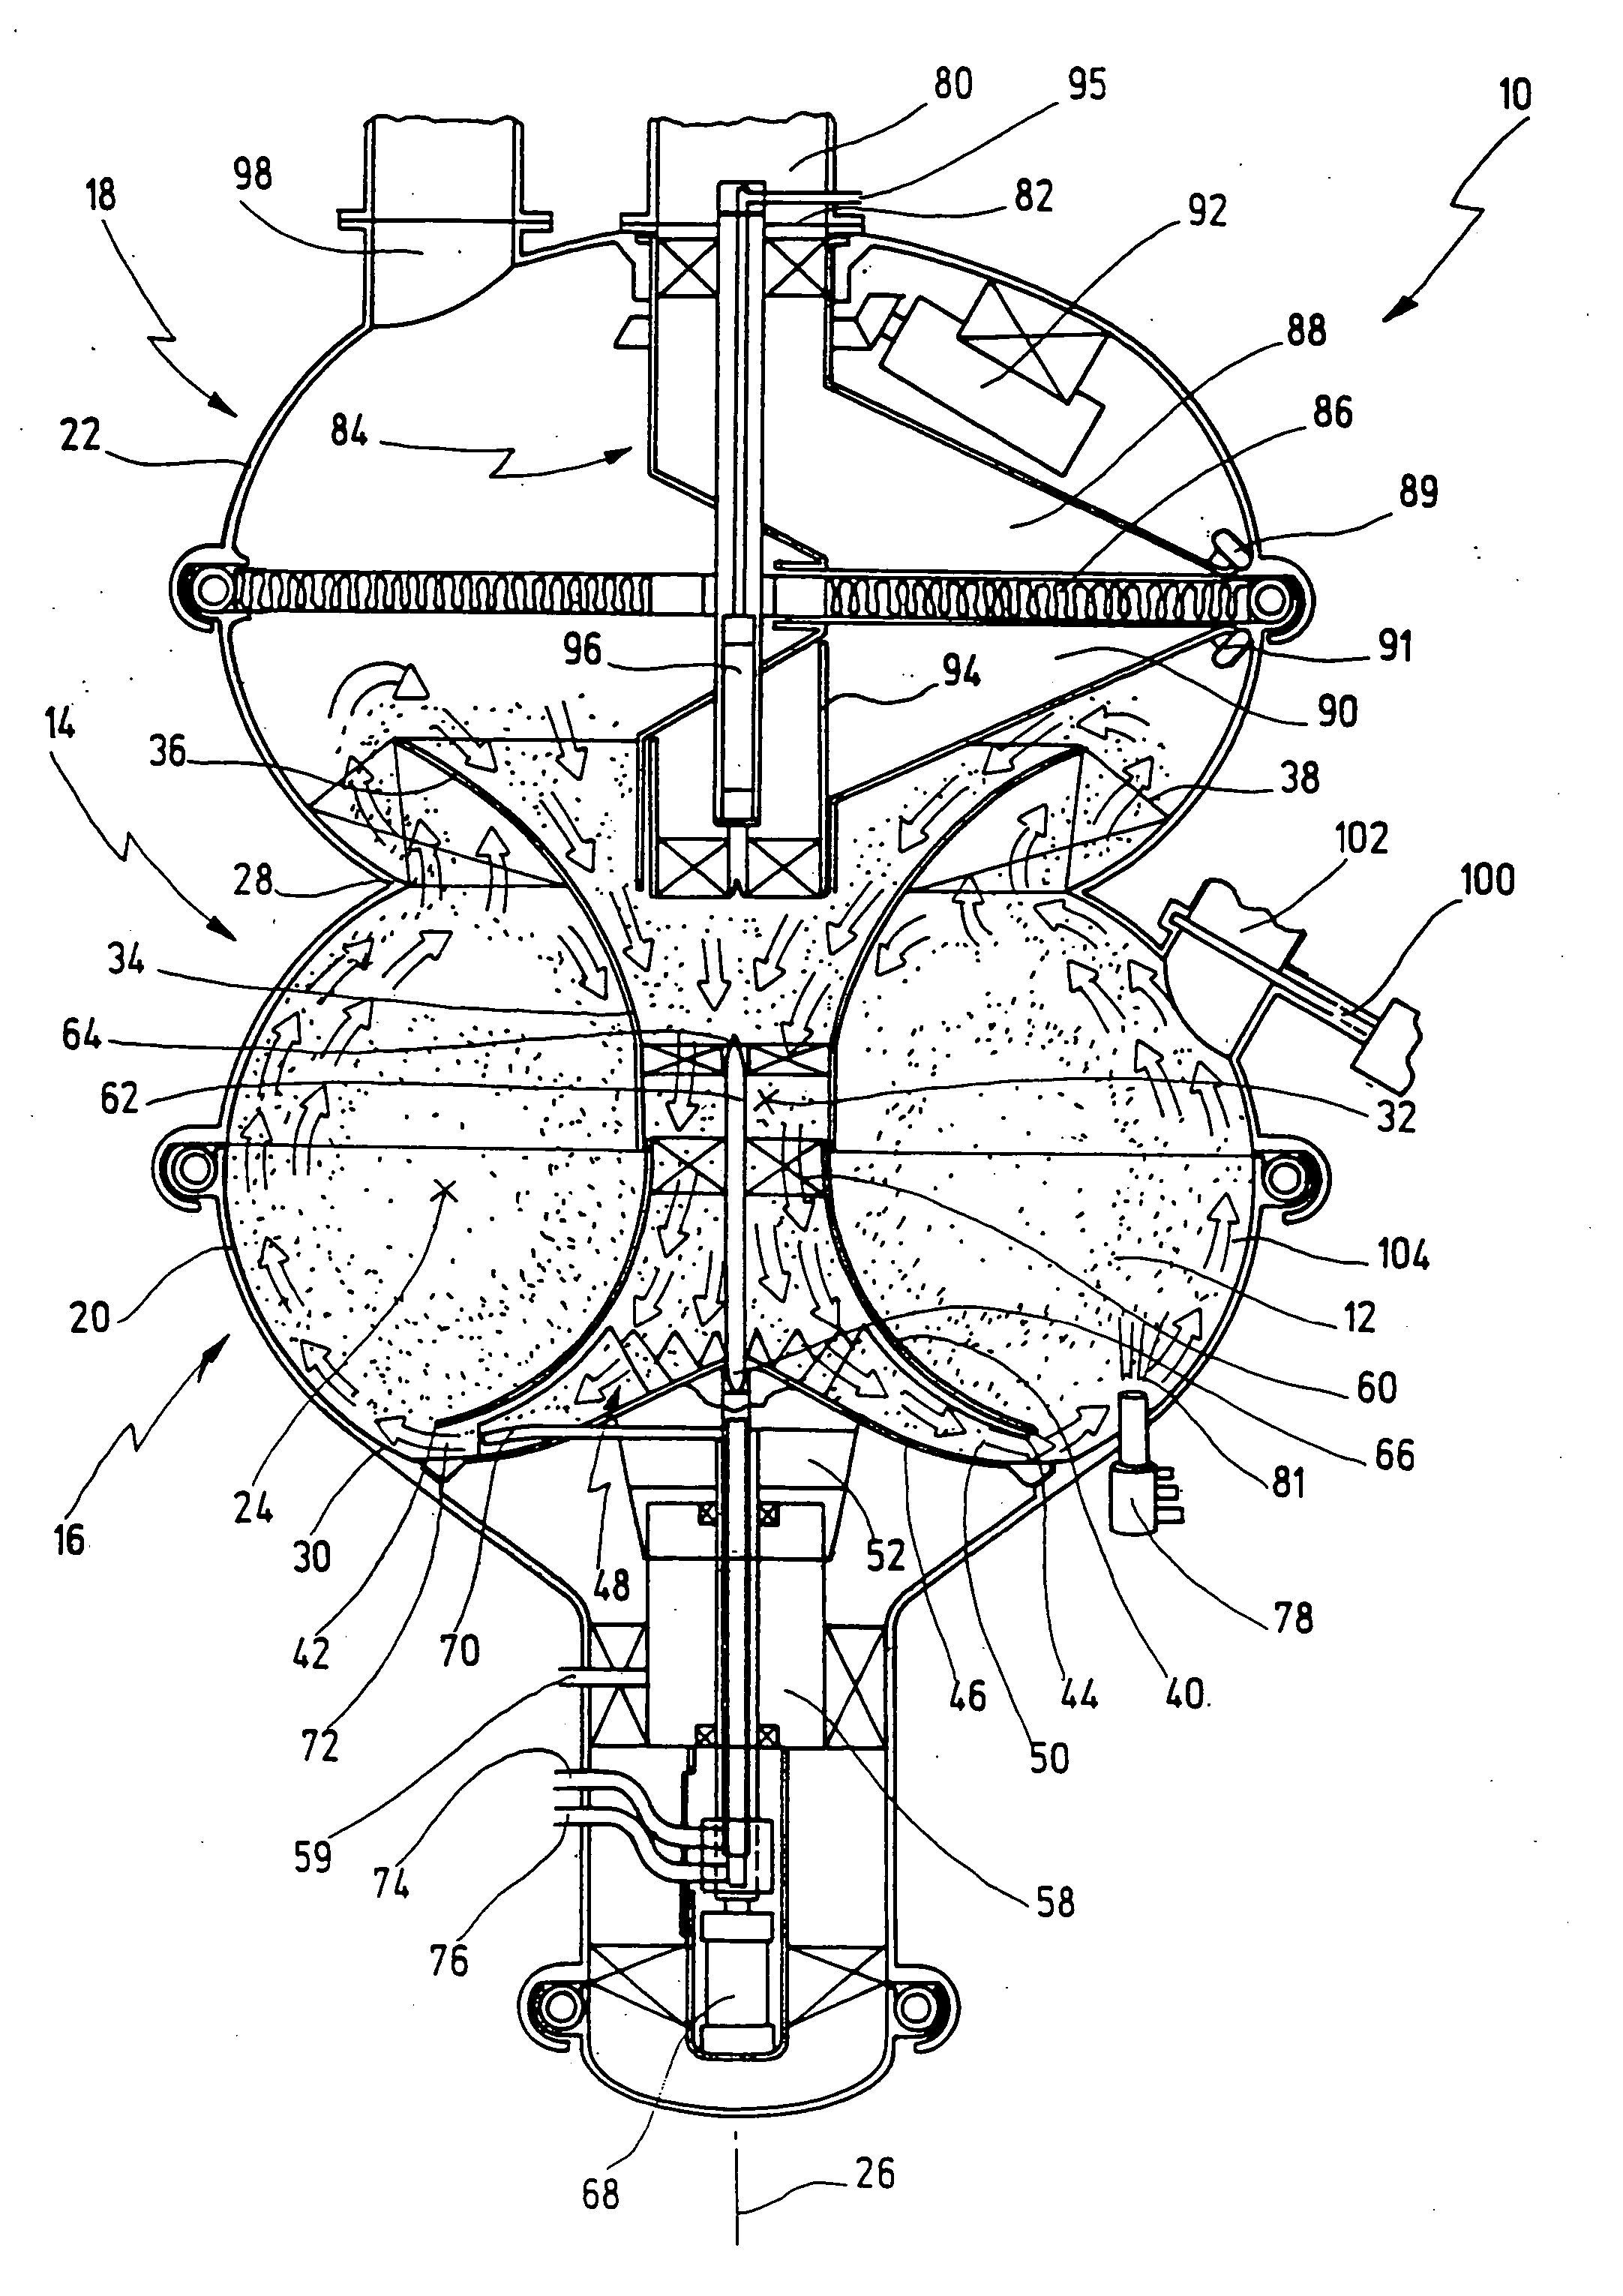 Method and apparatus for treating particulate-shaped material, in particular for mixing, drying, graduating, pelletizing and/or coating the material